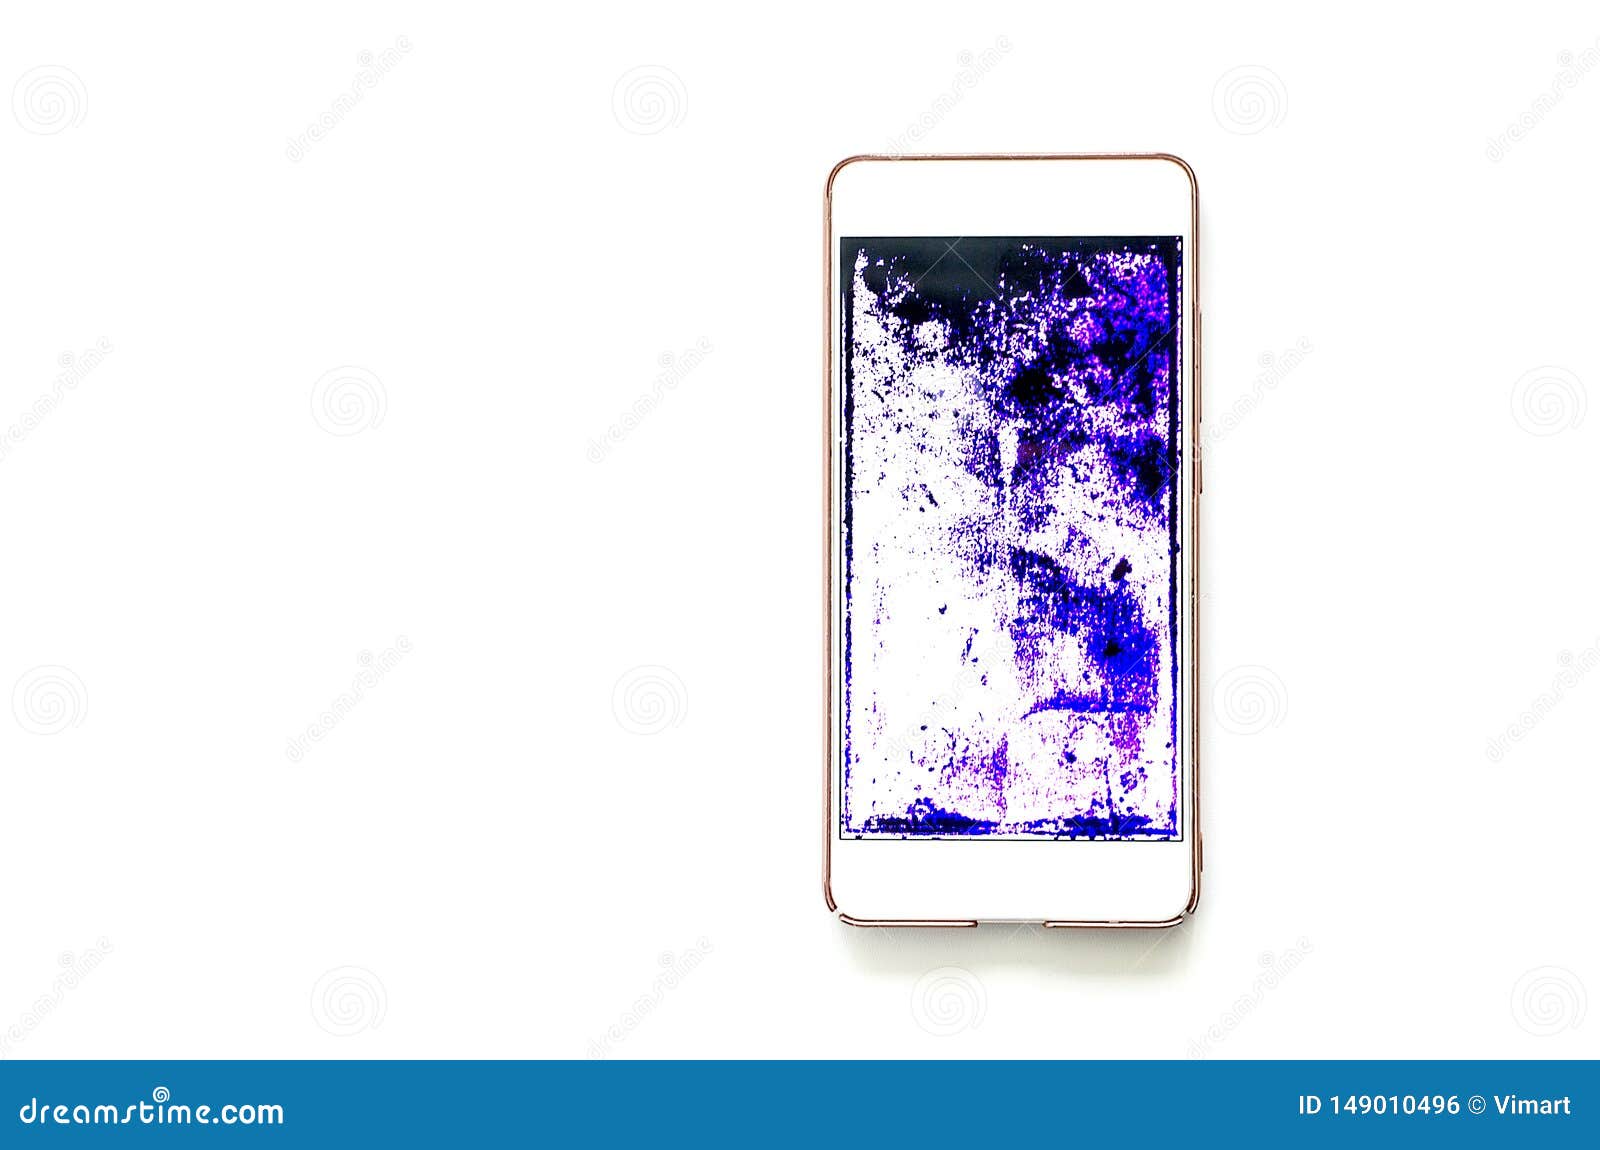 Phone with a Screen. Dark Purple, Blue and Black Over the Entire Surface Stock Photo - Image of glass, object: 149010496